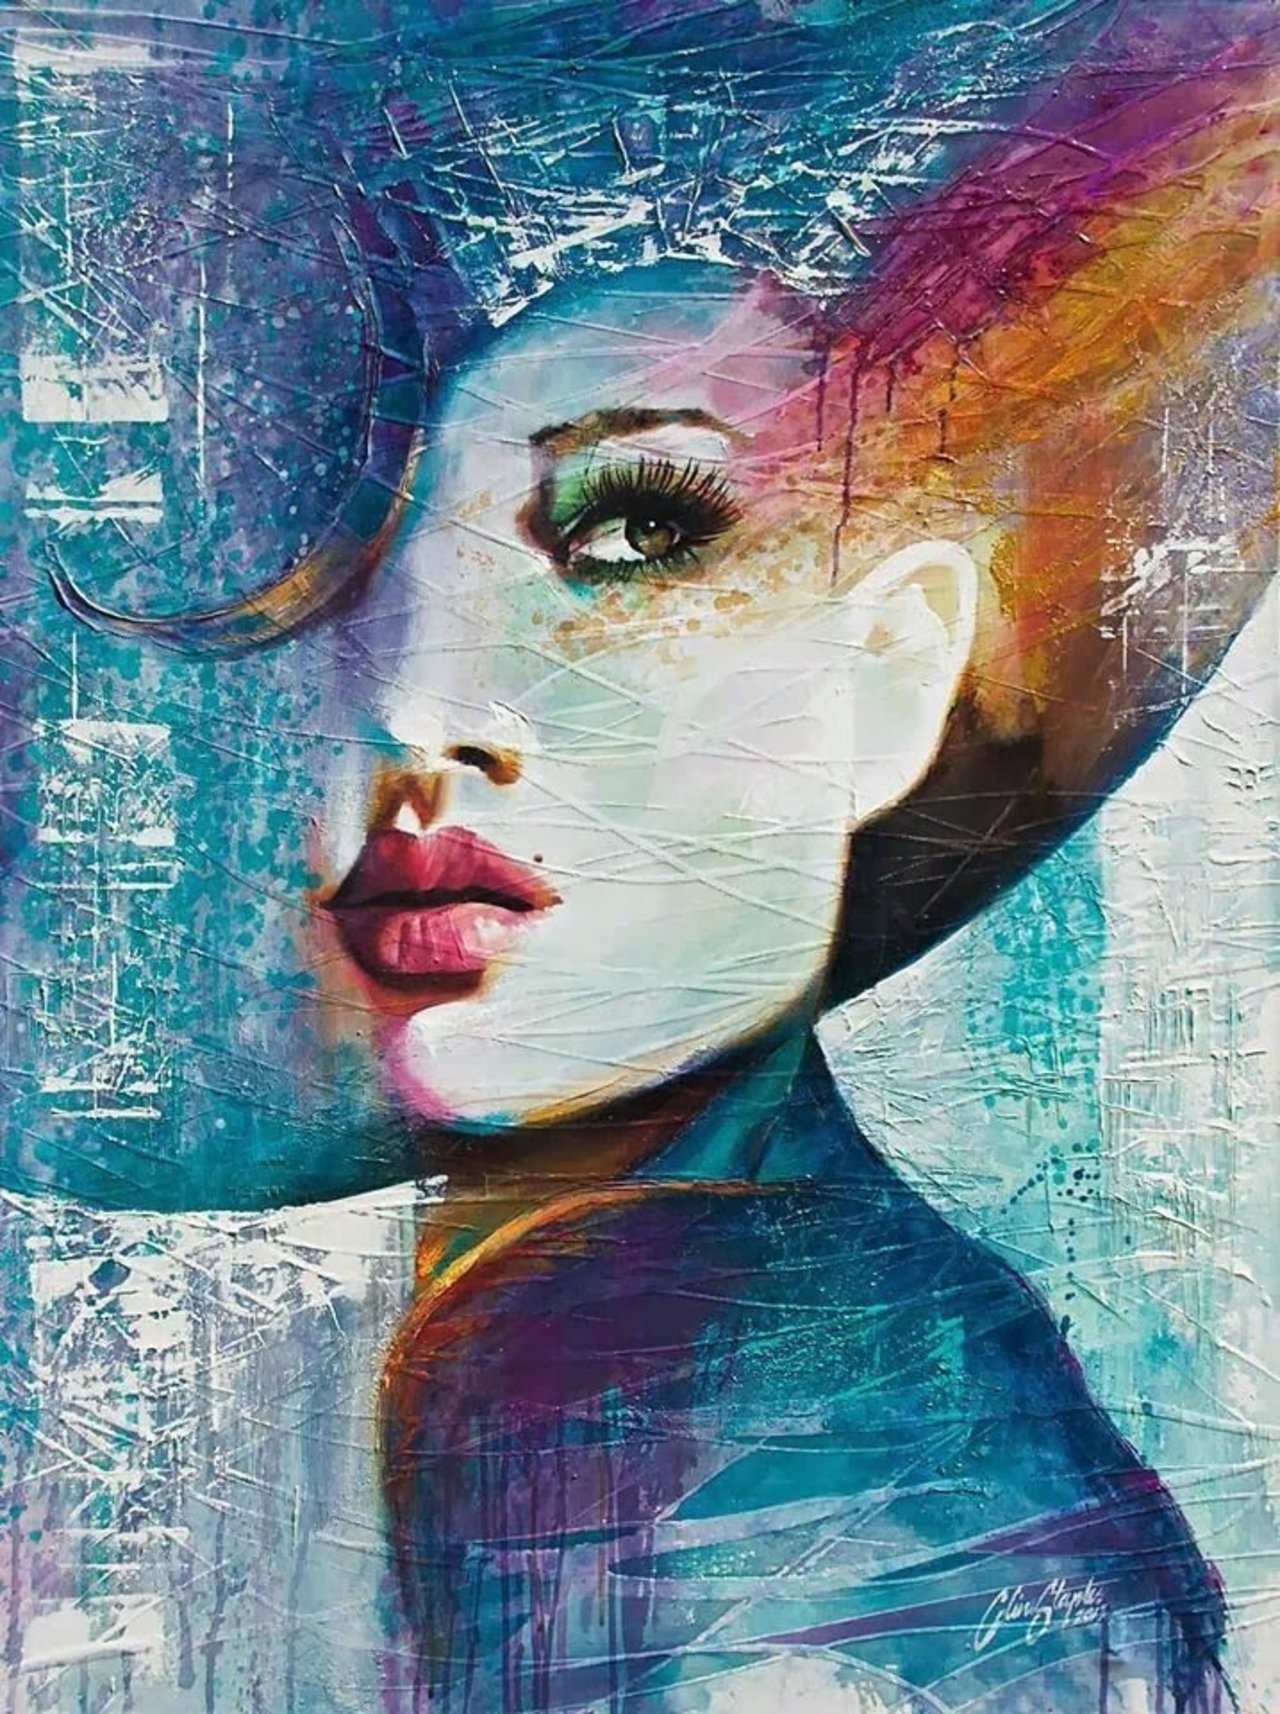 "Beauty Painting - by Hans Mantel" @overjas#beauty #painting #lips #colours #nice #art… http://beartistbeart.com/2016/05/13/beauty-painting-by-hans-mantel https://t.co/88PEDq36jt